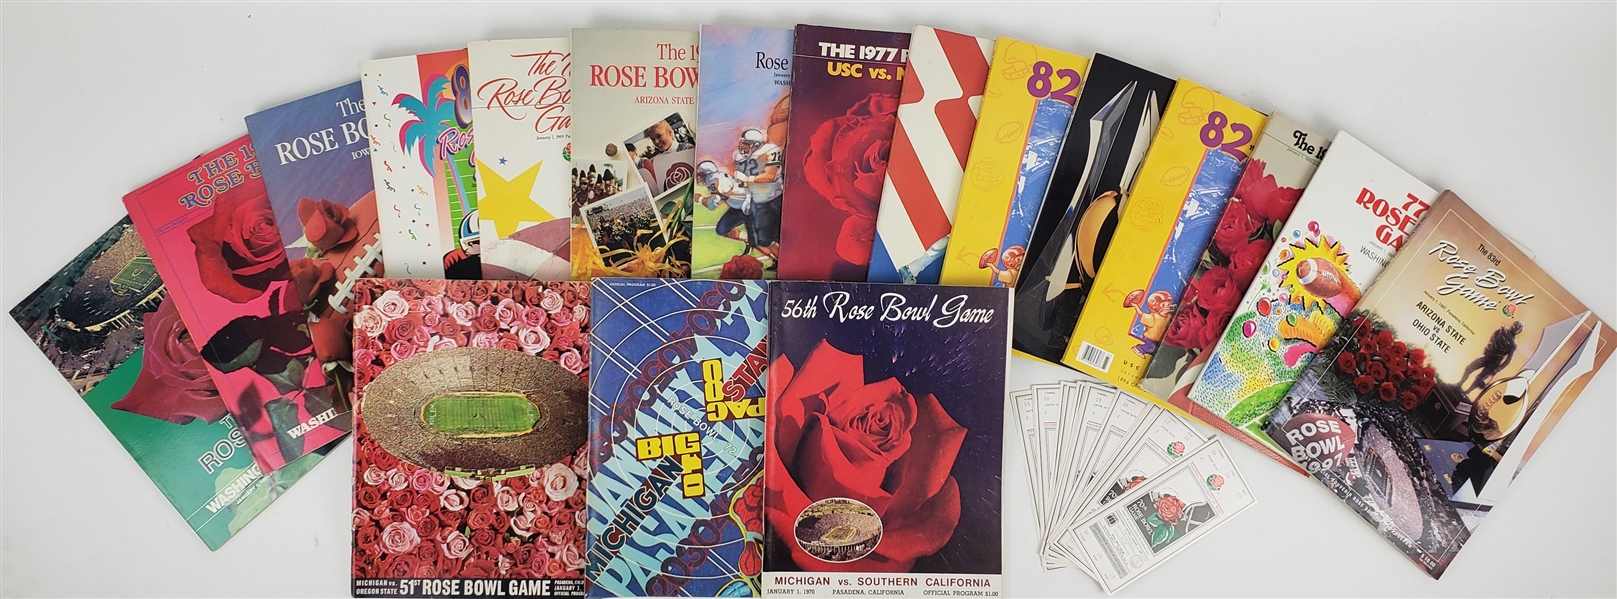 1960s-1990s Rose Bowl Programs & Tickets (Lot of 40+)